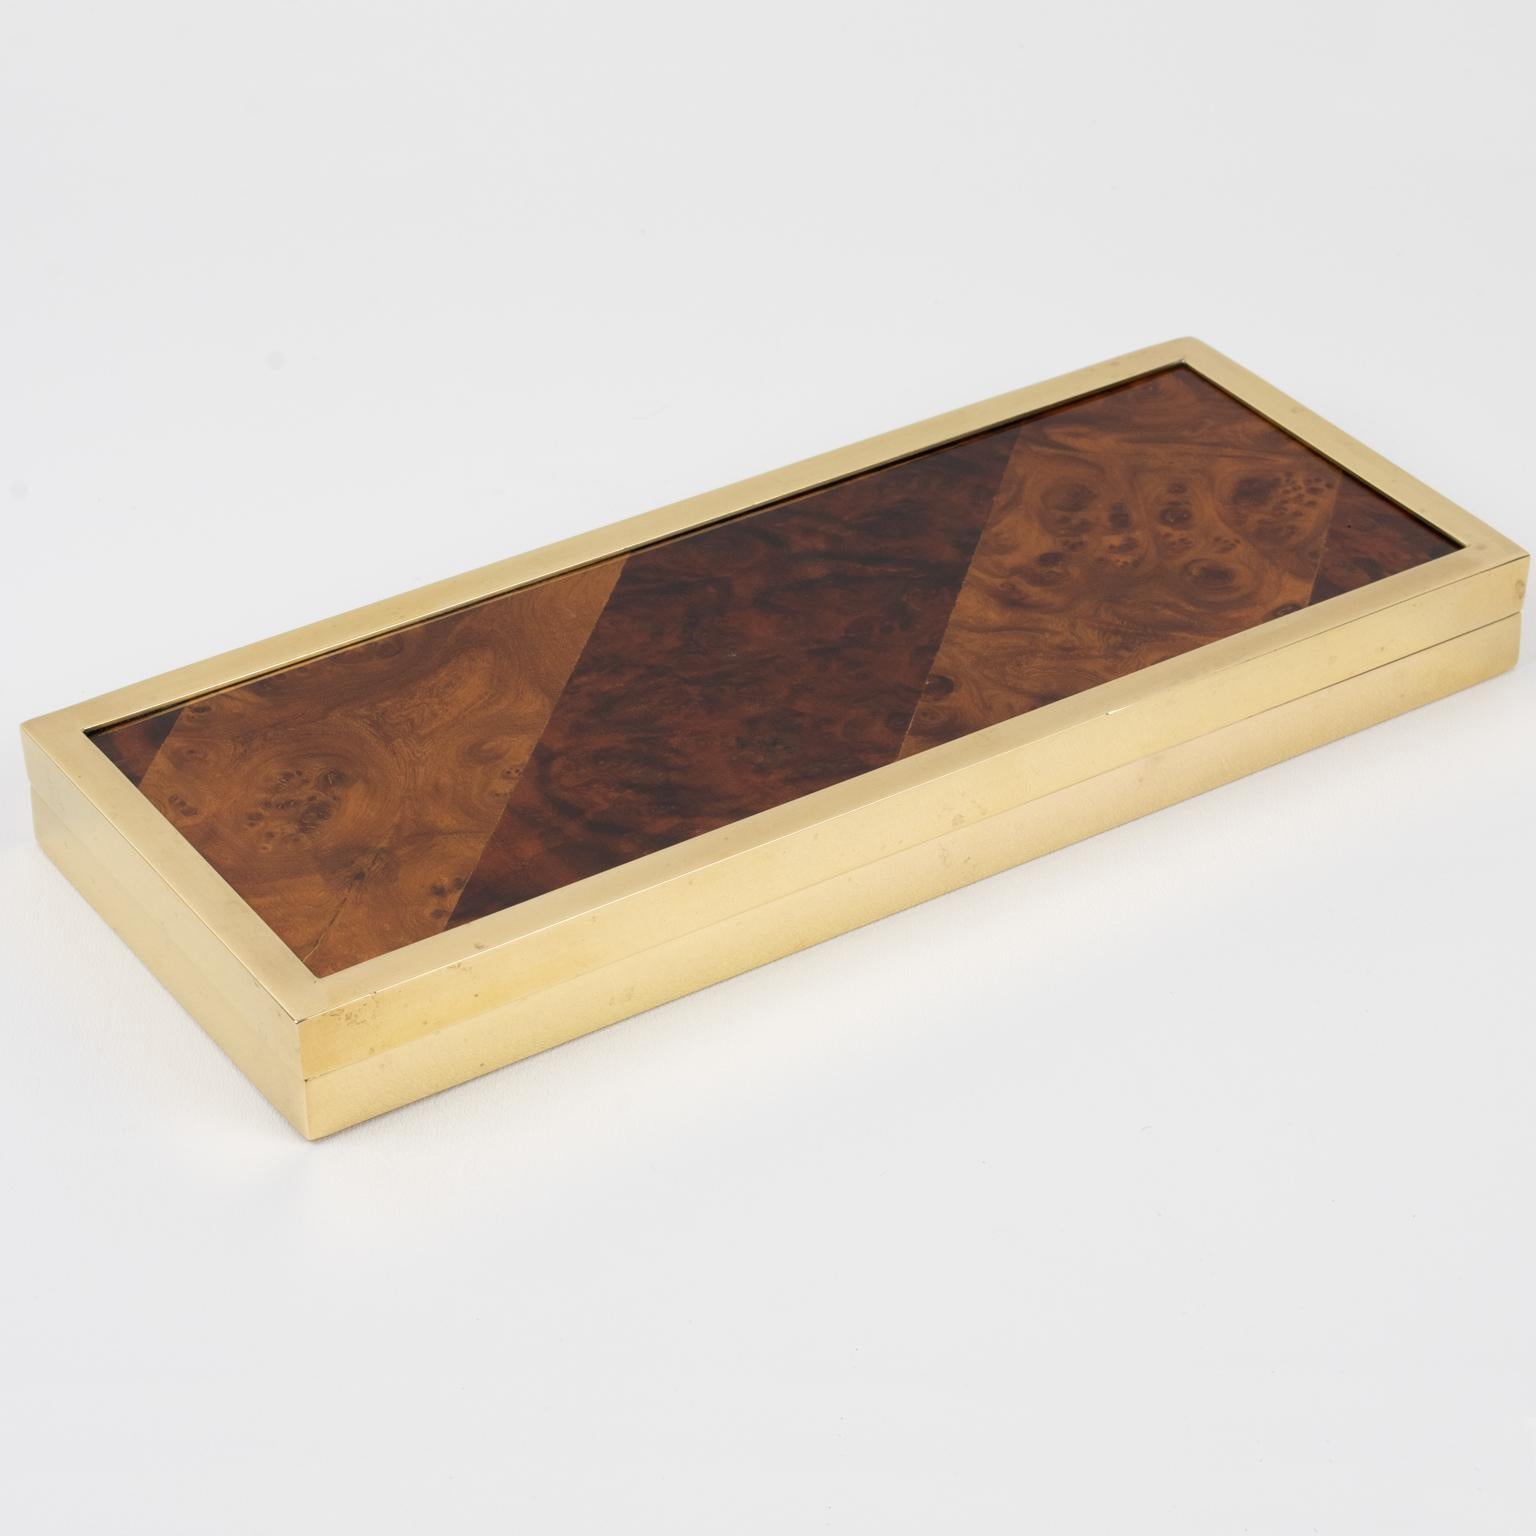 Montagnani Firenze, Italy, designed this exquisite decorative box. Its Mid-Century modernist design boasts an elongated rectangular flat shape, with burl-wood geometric marquetry veneer on the lid and polished gilded brass metal framing. The